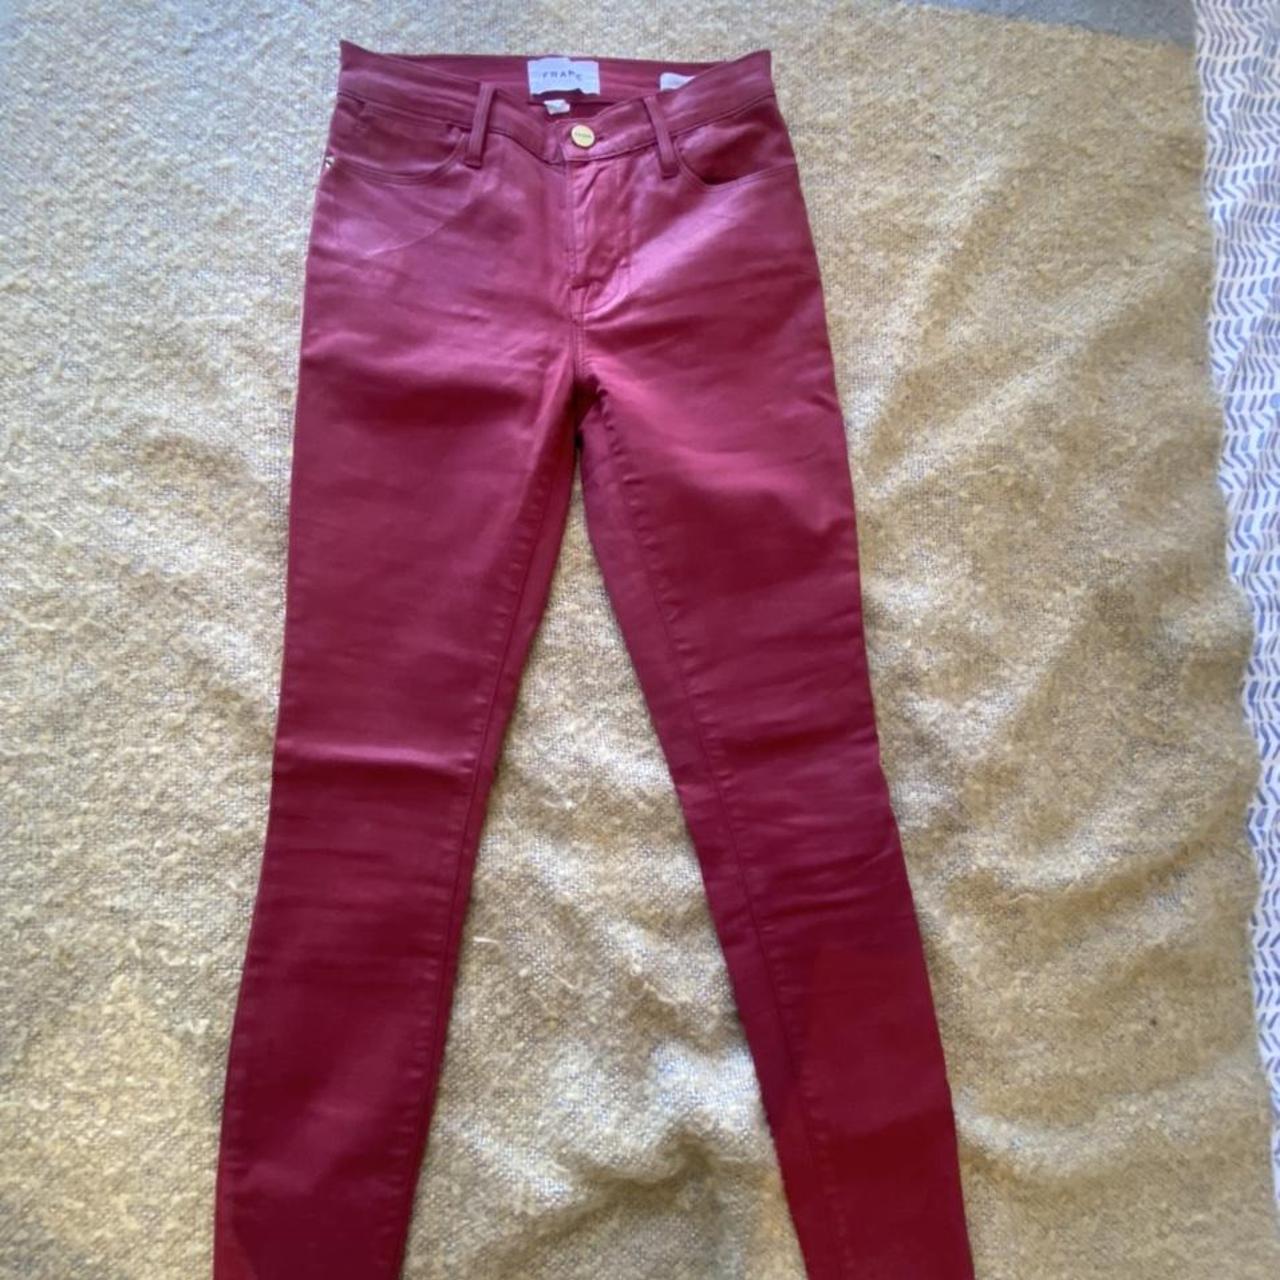 Gorgeous leather look red Frame trousers size 4-6... - Depop